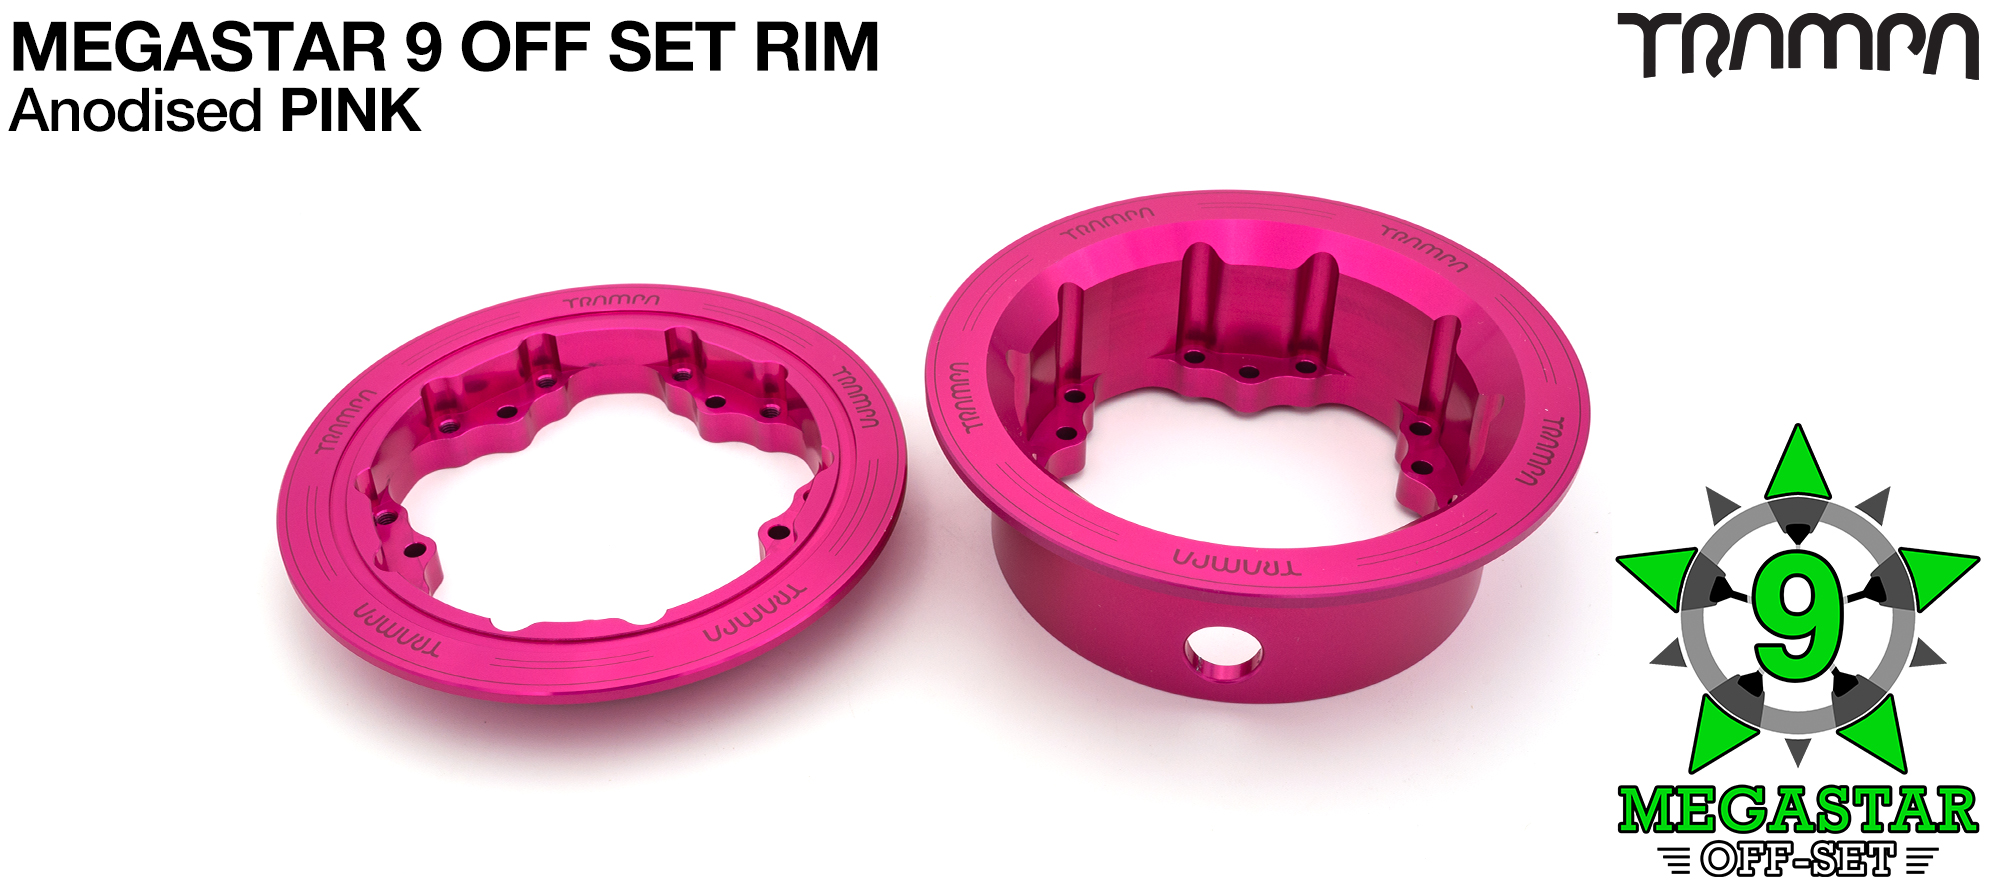 MEGASTAR 9 Rims Measure 3.75/4x 2.5 Inch & the bearings are positioned OFF-SET & accept 3.75 & 4 Inch Rim Tyres - PINK